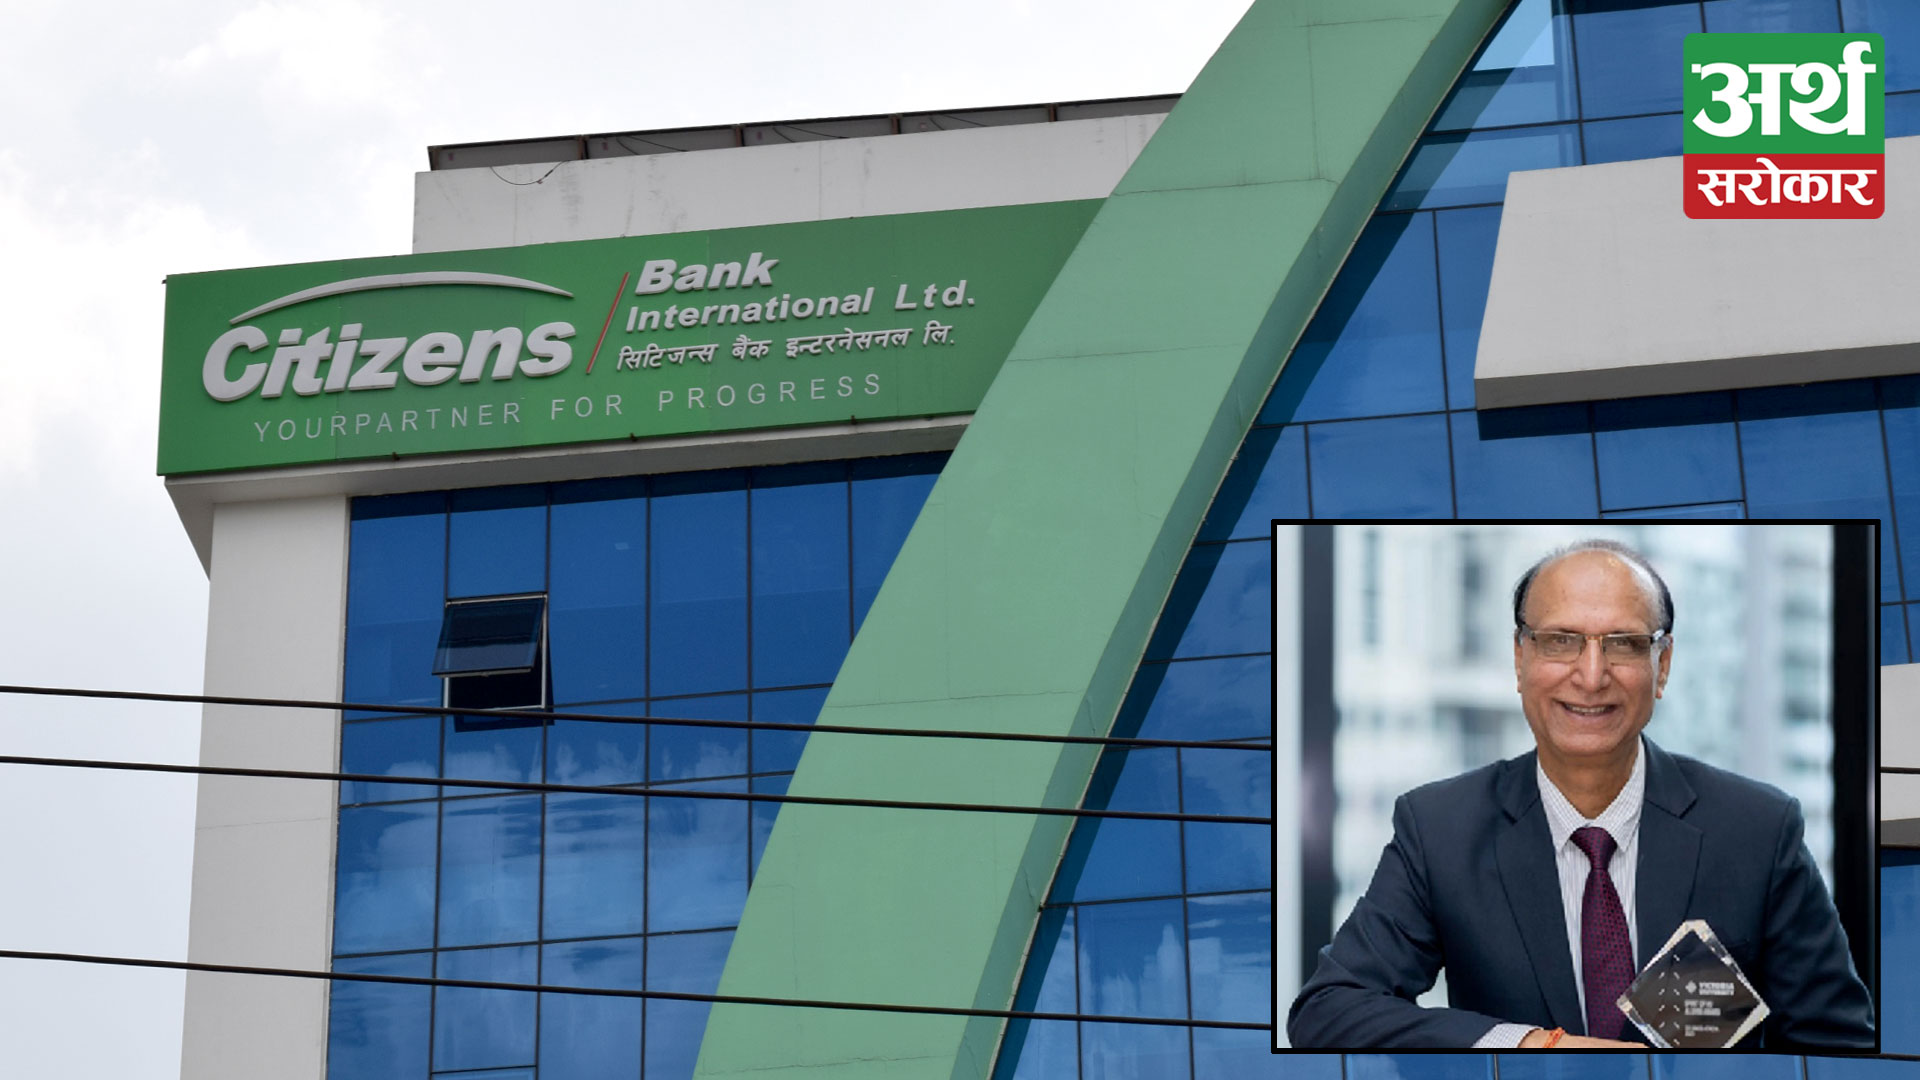 Dr. Binod Aatreya appointed as the new independent operator of Citizens Bank